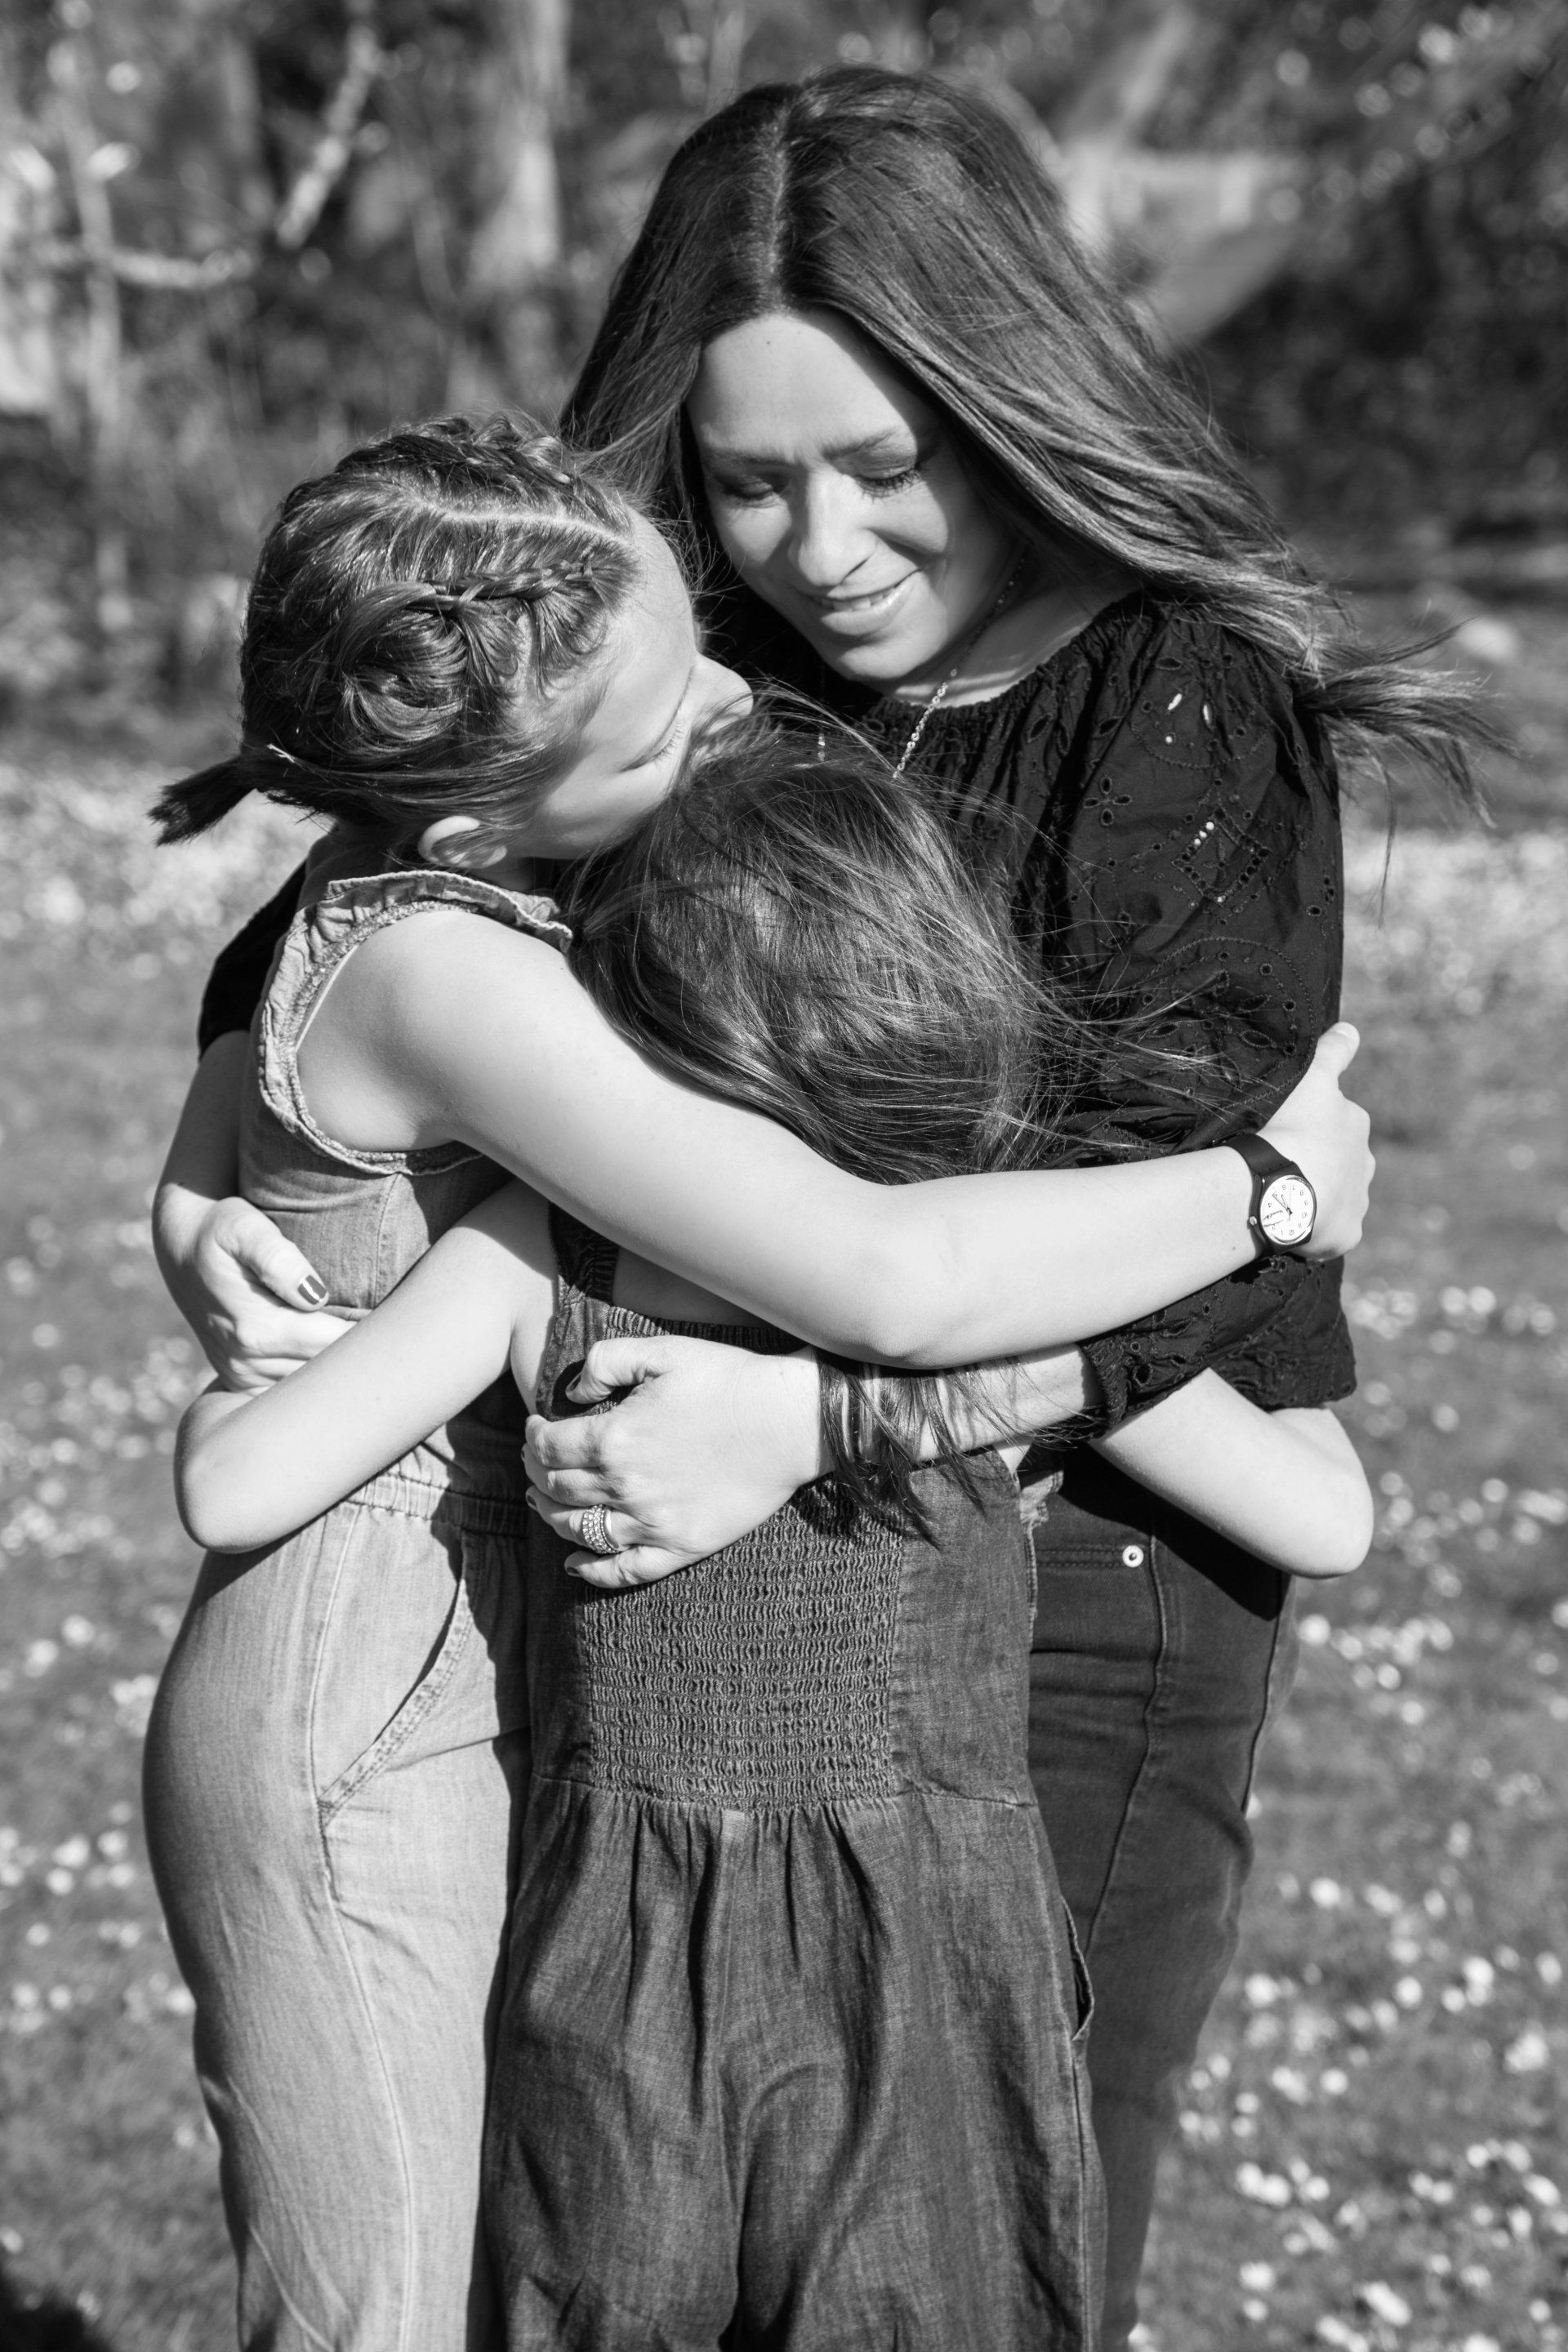 Natalie-DAngelo-Photography-Vancouver-BC-Canada-BlackWhite-Family-Portraits-Visual-Storyteller-mother-daughters-mothersday